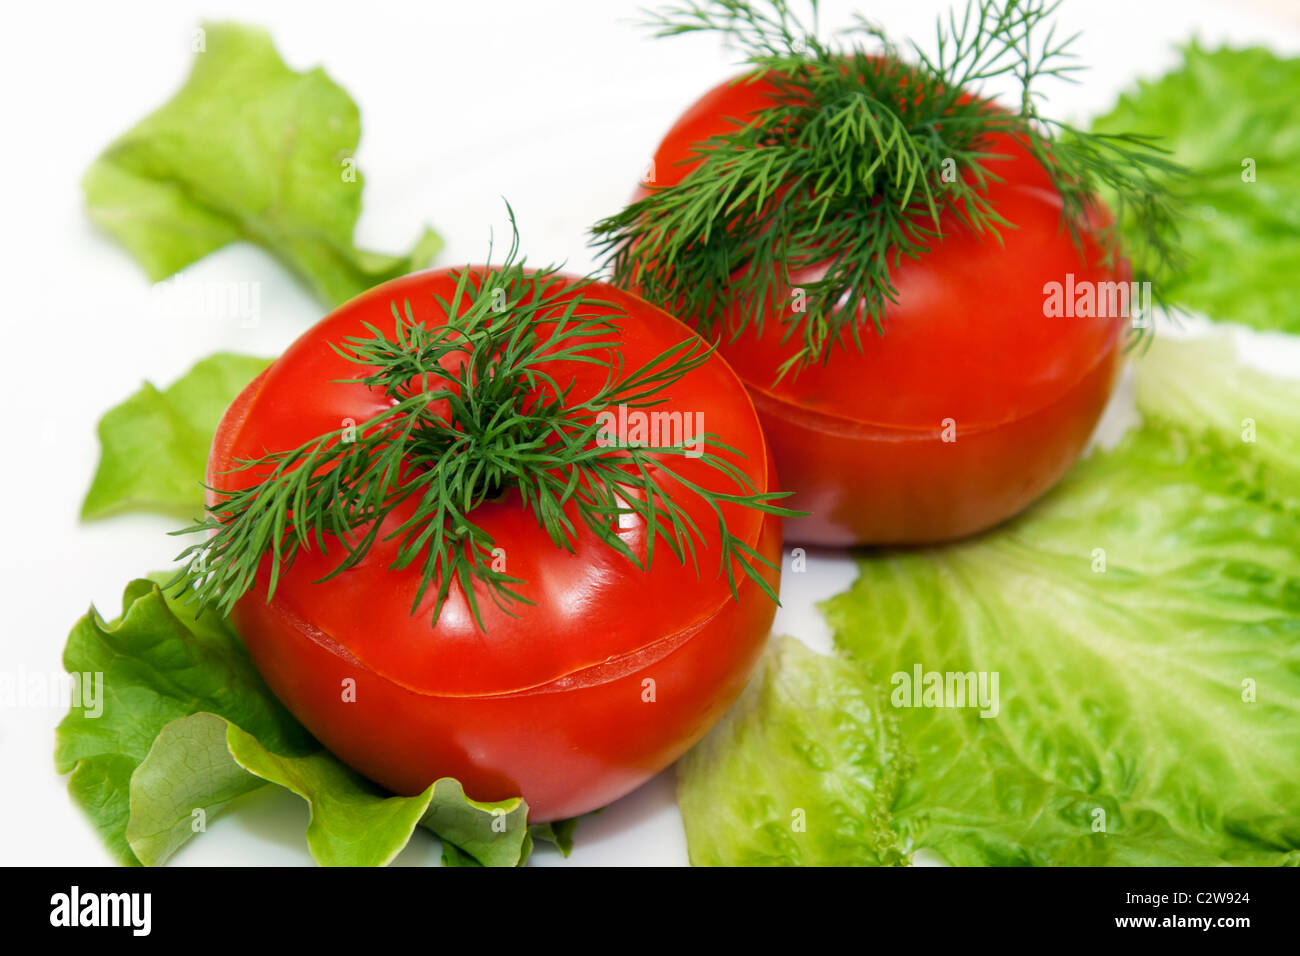 two stuffed tomatoes on lettuce leaf Stock Photo